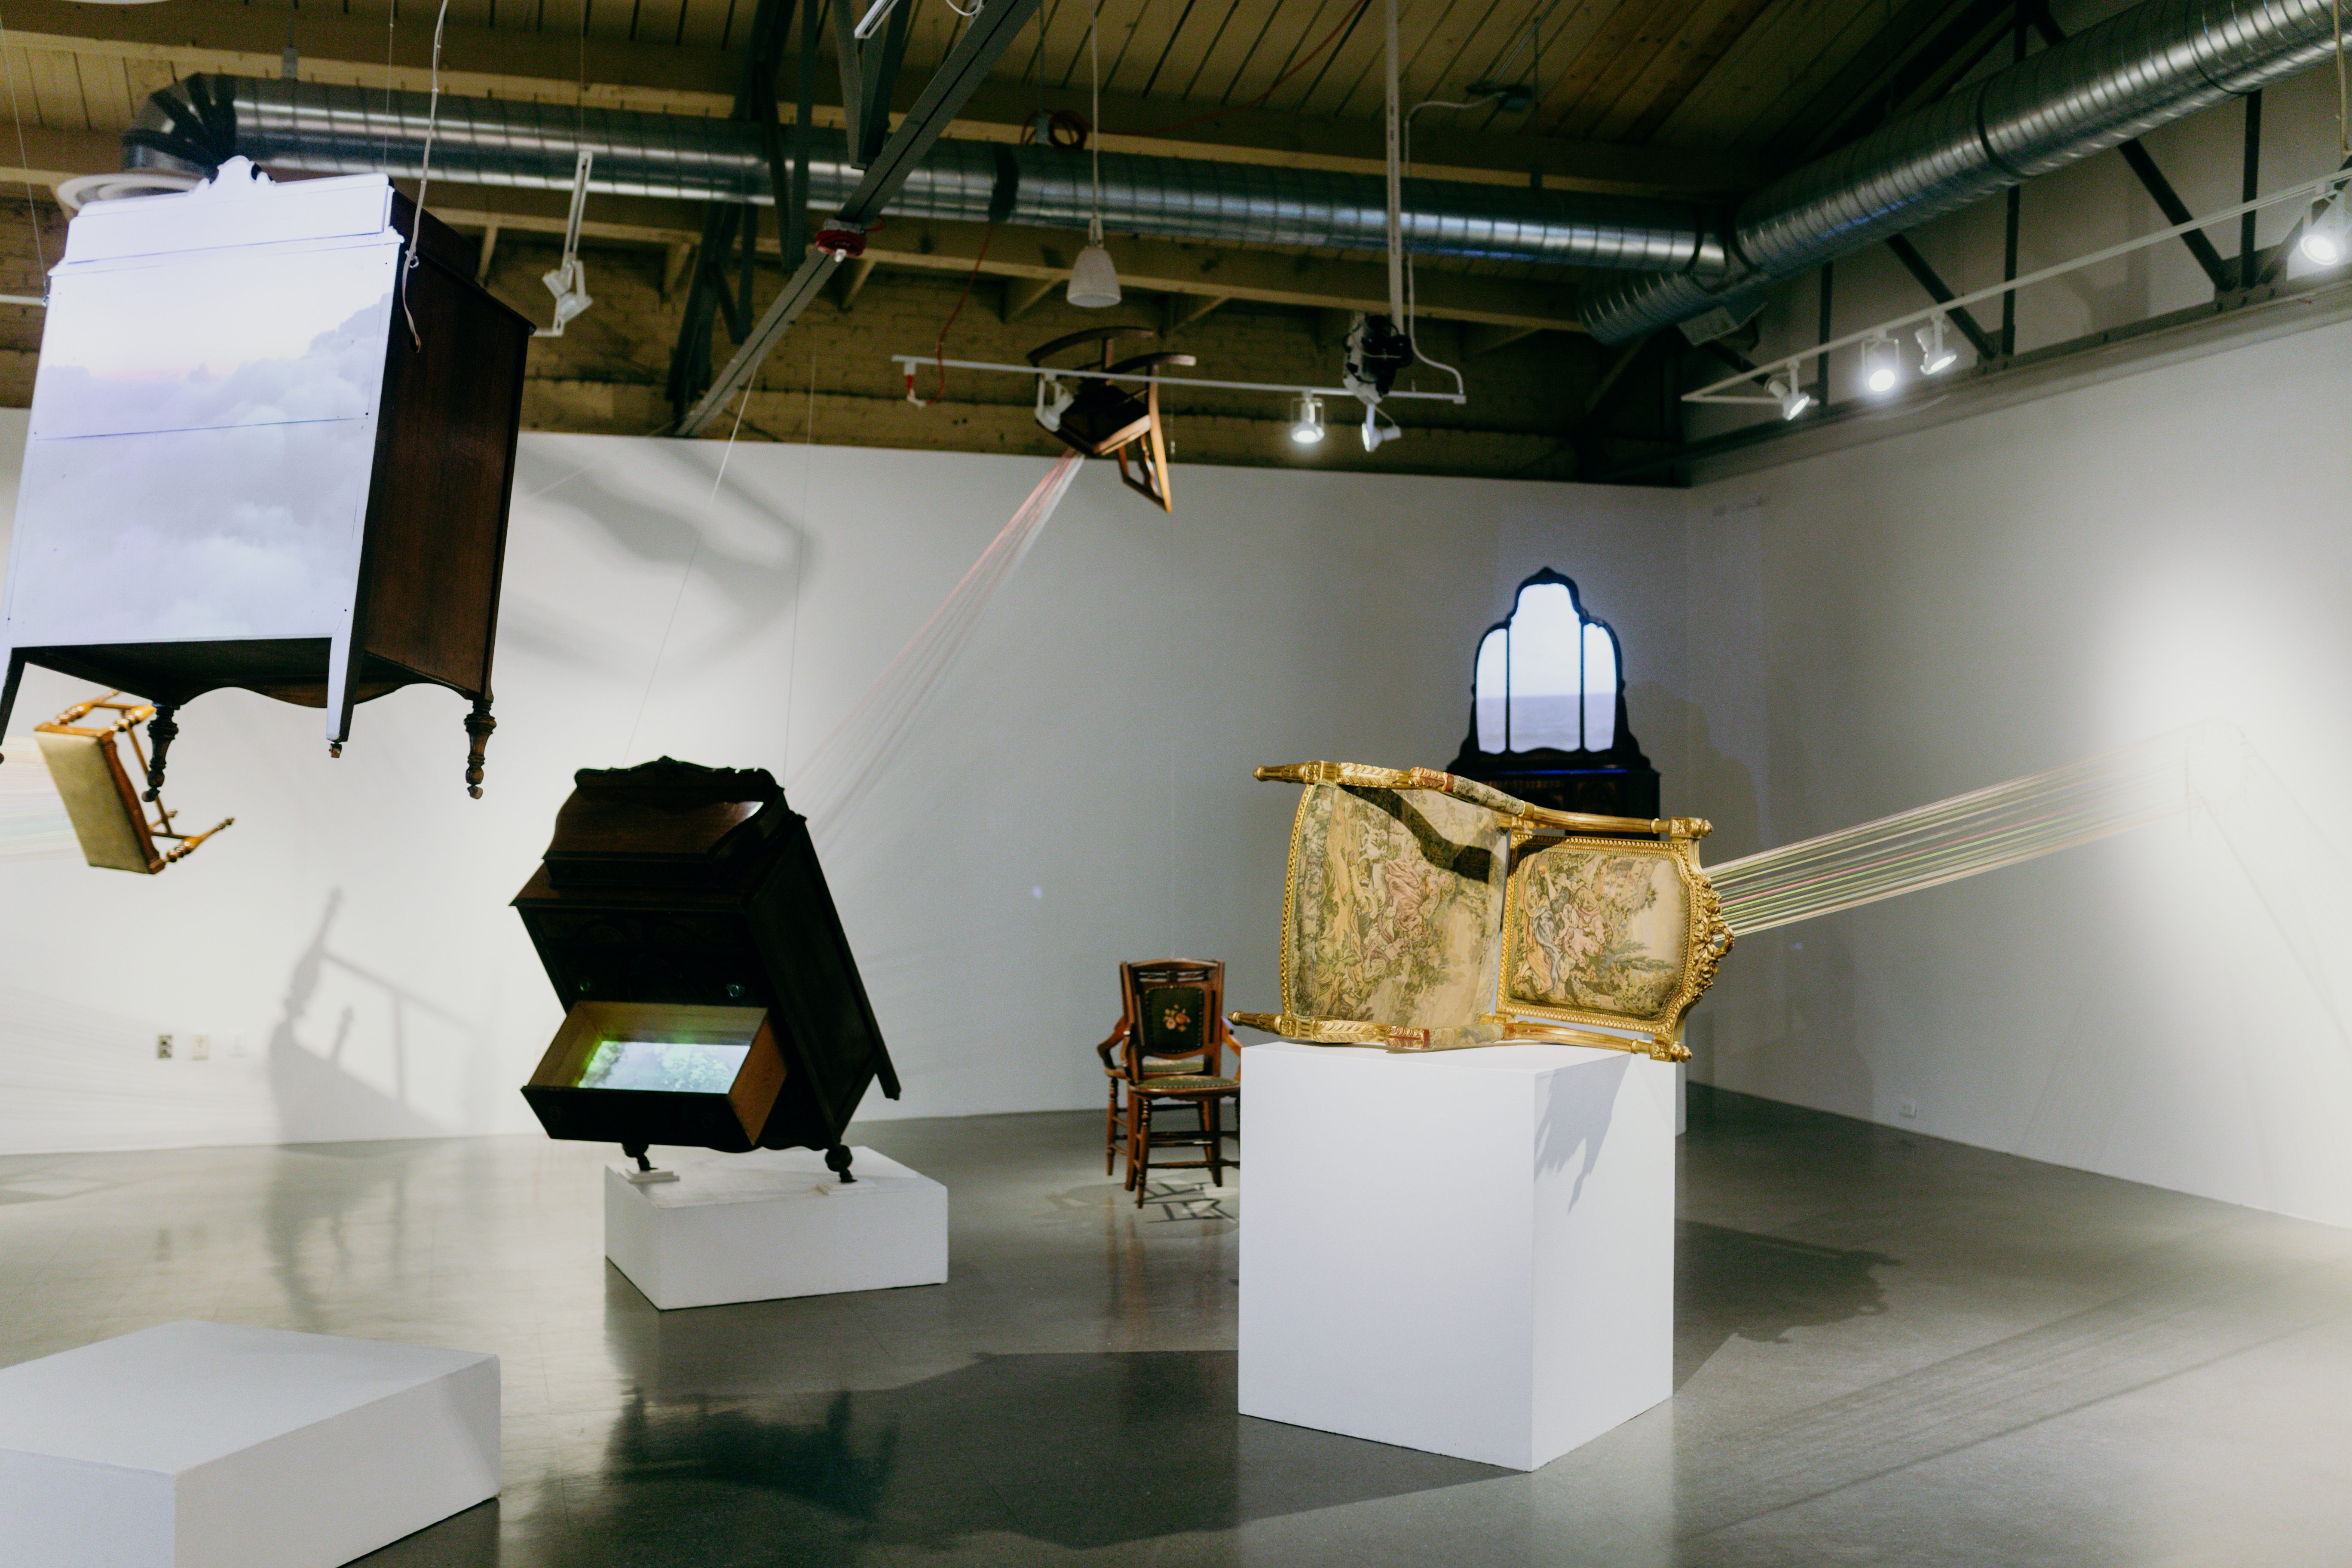 Installation shot of an interior gallery space. There are pieces of furniture suspended mid fall upon white pedastals. ﻿